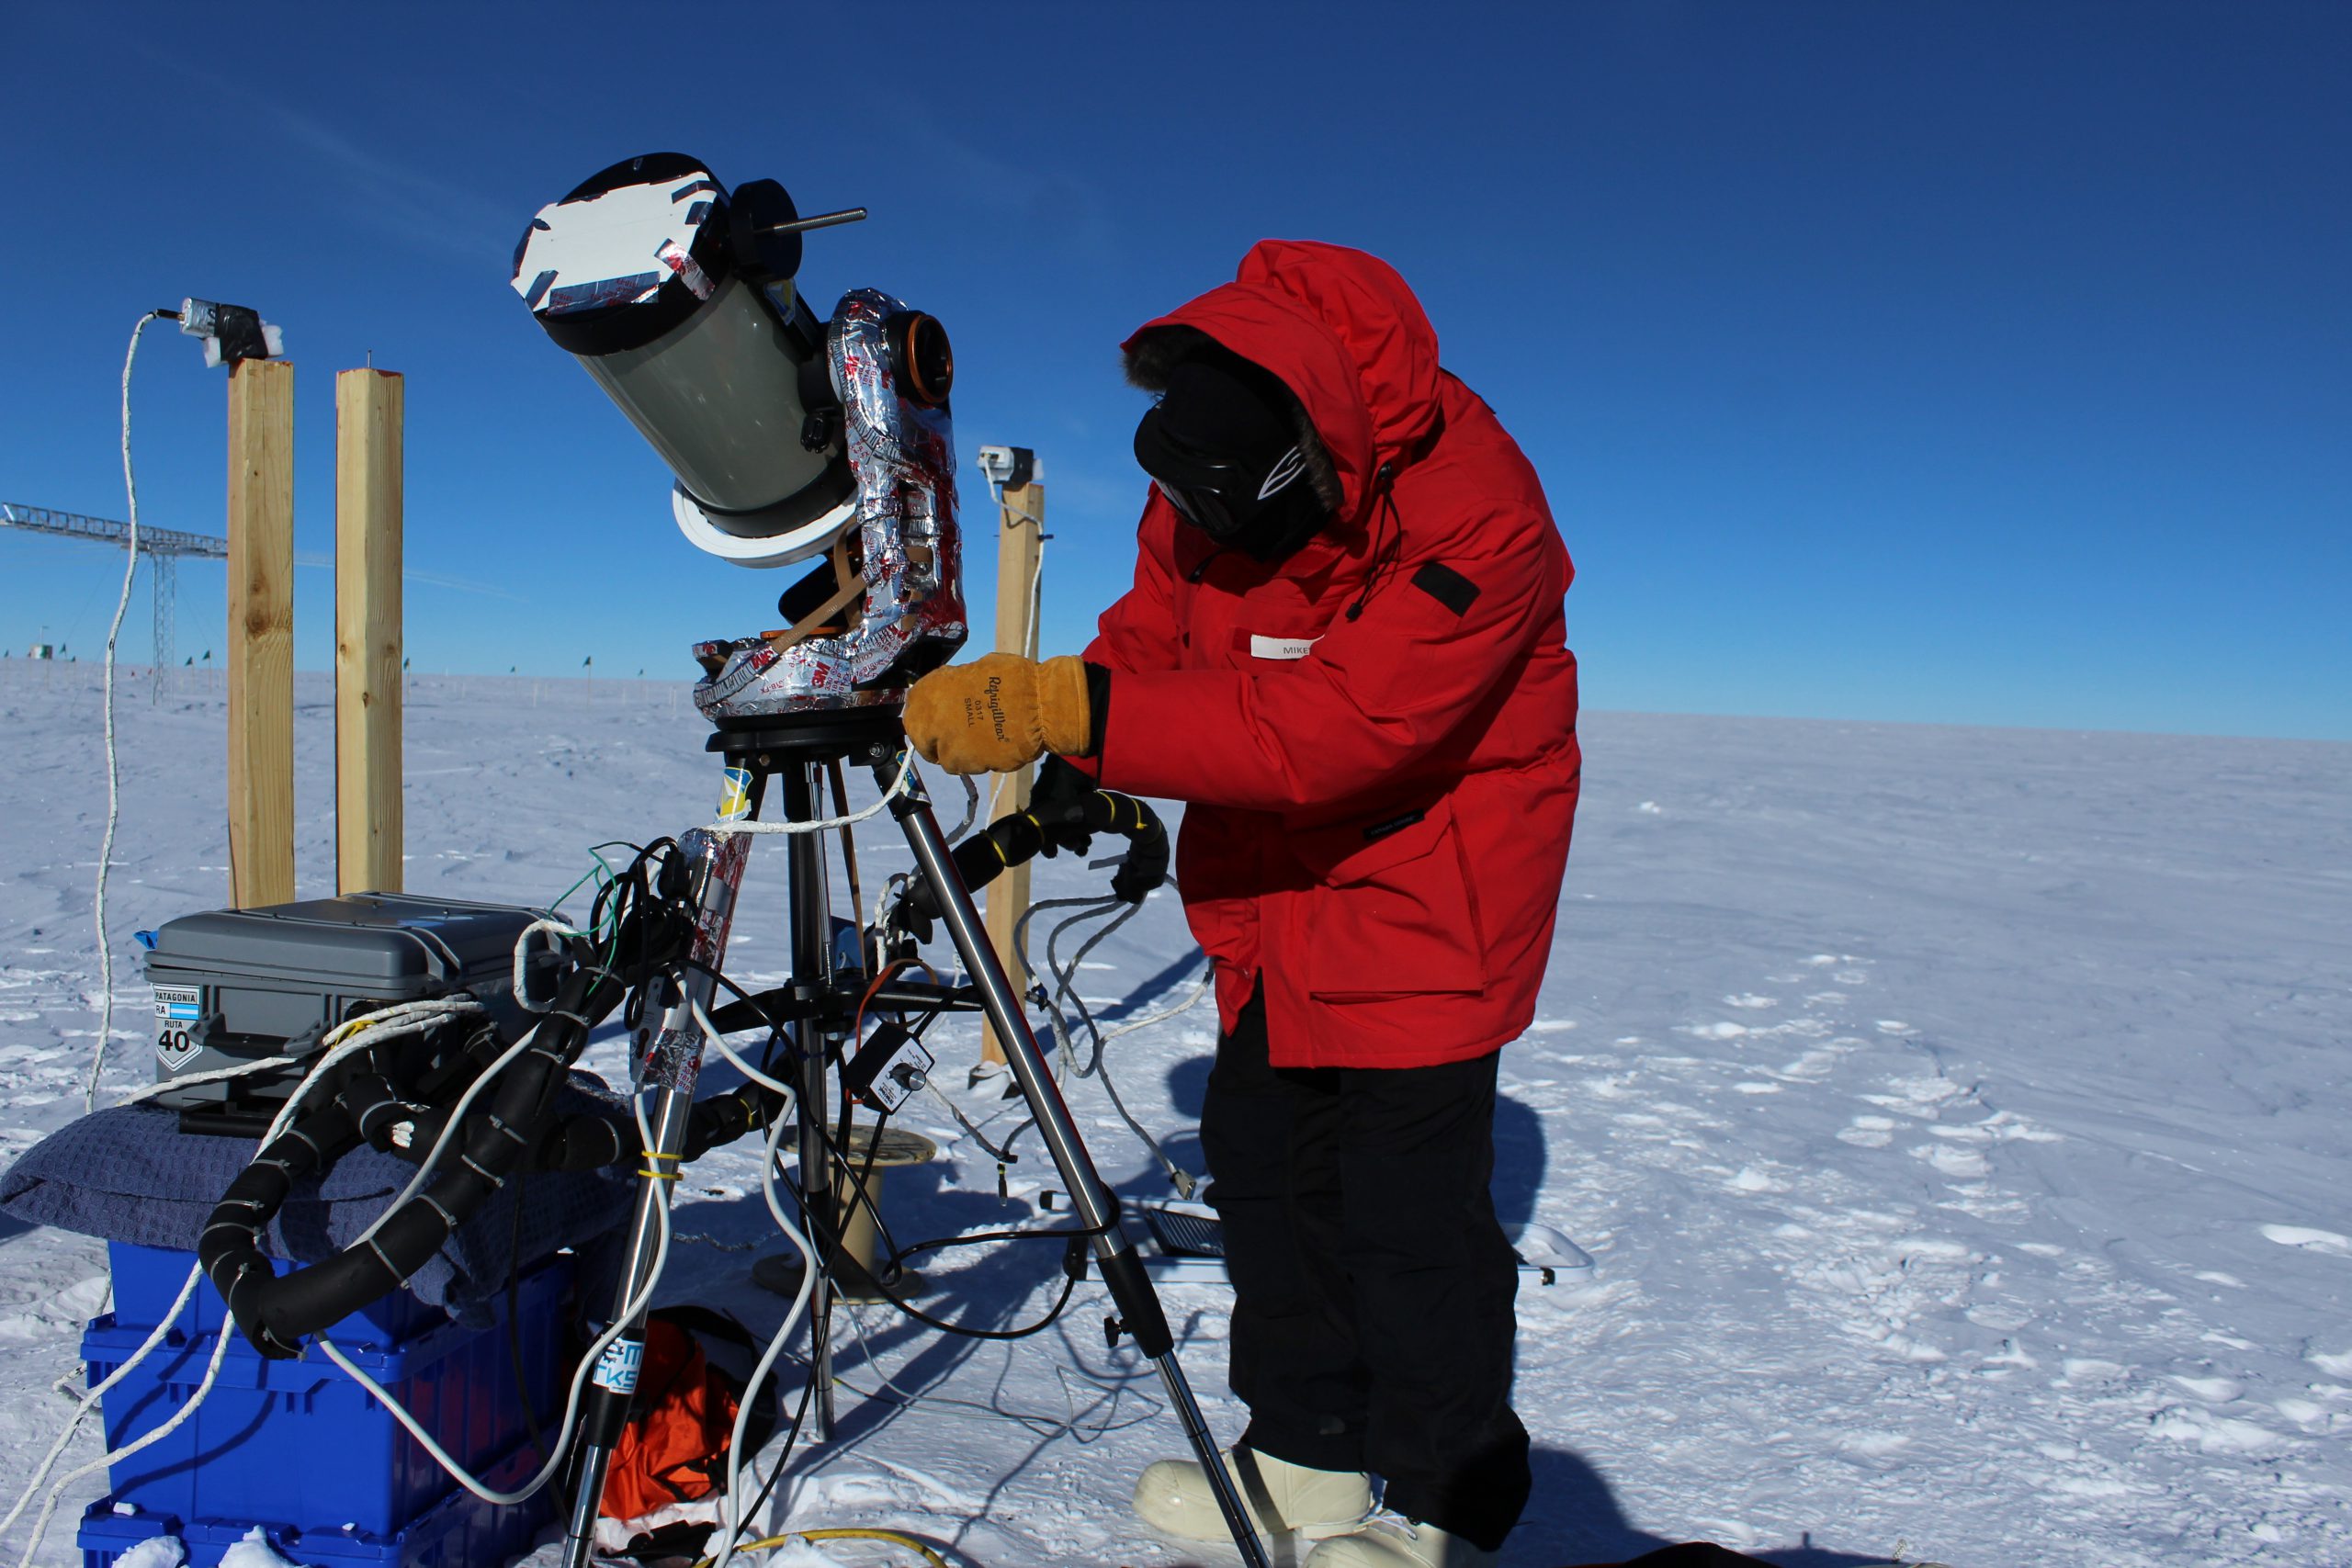 Researcher working on telescope at south pole. The ground is snowy.